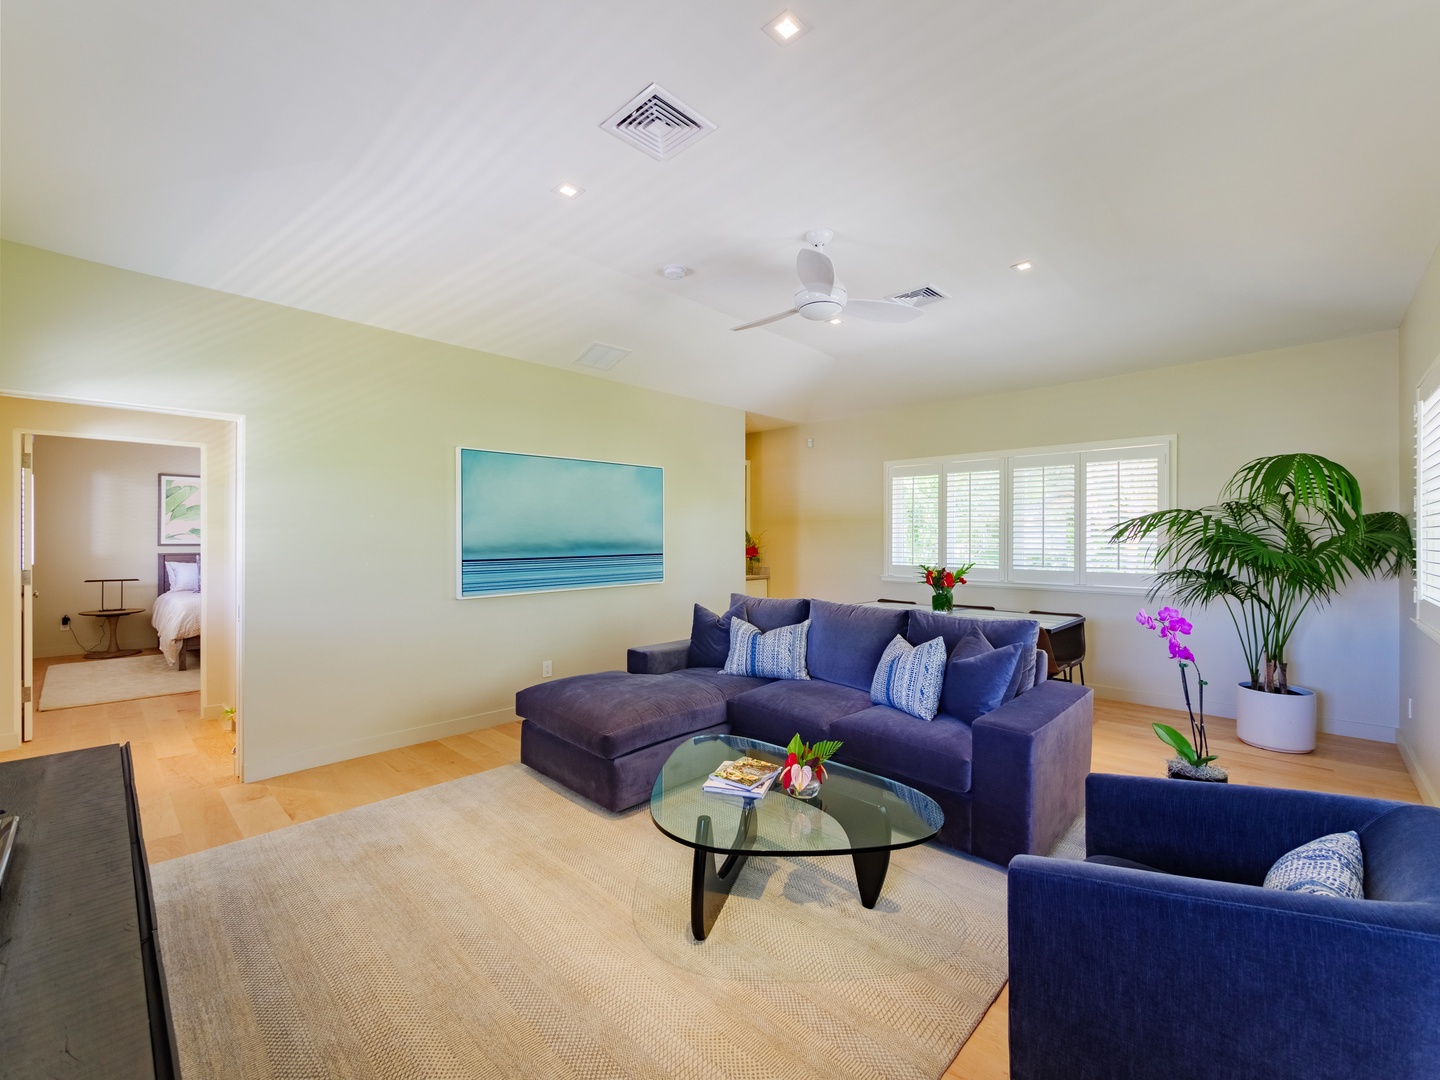 Honolulu Vacation Rentals, Paradise Beach Estate - Unwind in the cozy family den, where heartfelt memories are made, stories are shared, and relaxation is second nature.